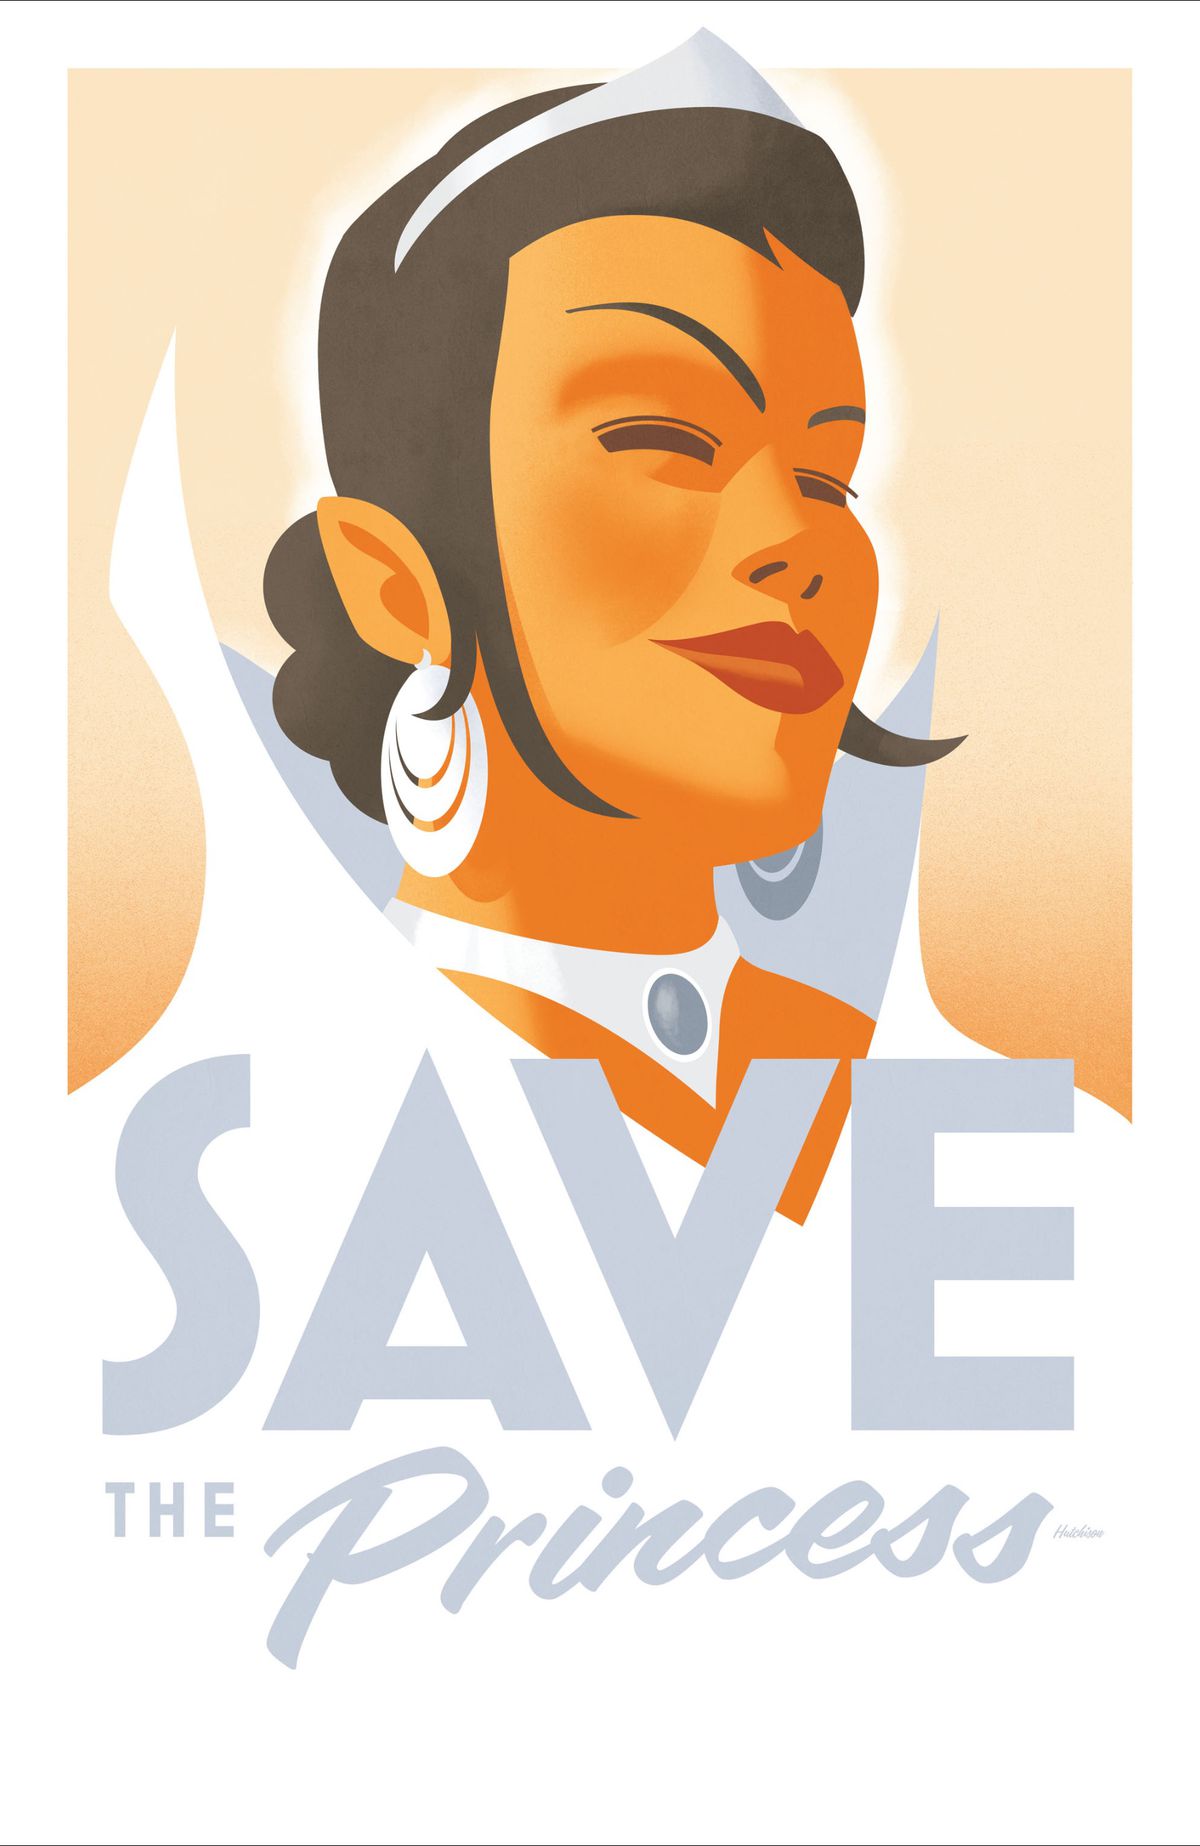 A graphic poster of a regal woman in white from the shoulders up, with the slogan “Save the princess.”